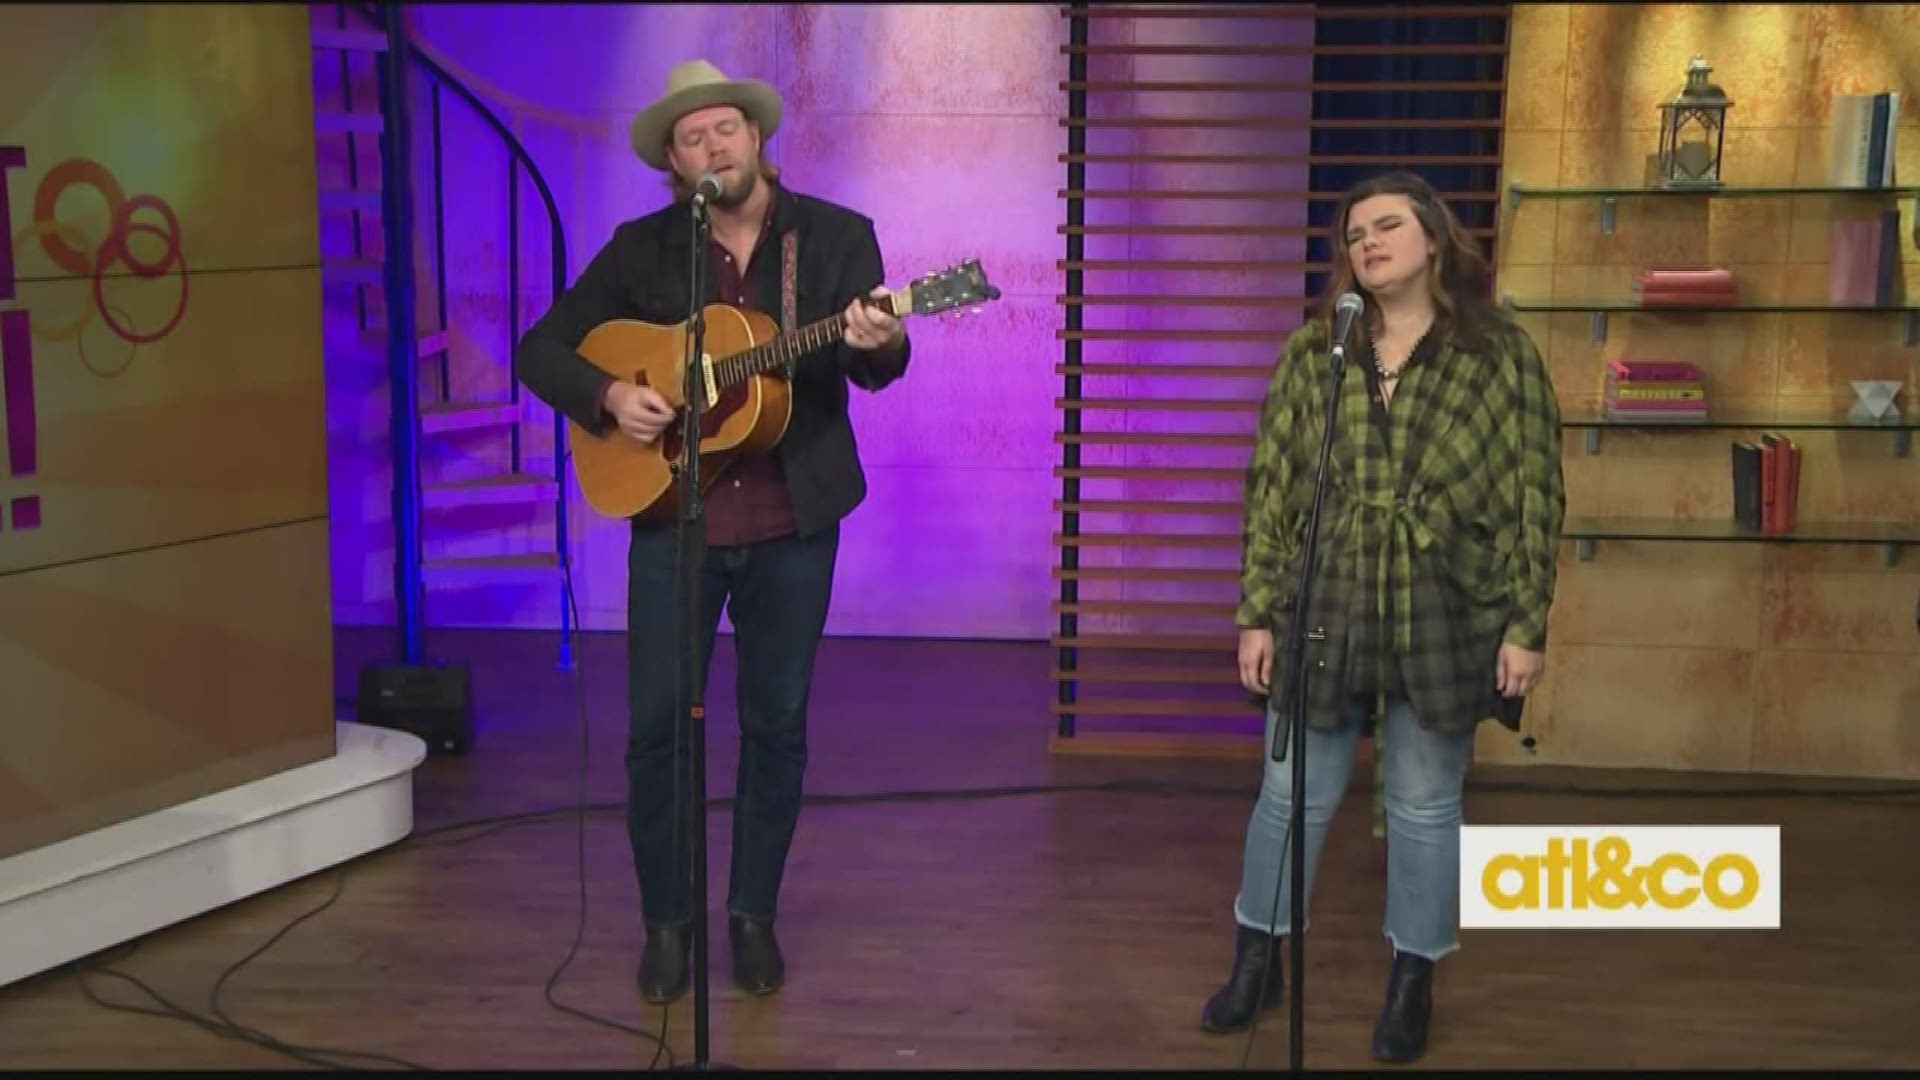 Married duo Ben Roberts and Emily Roberts perform classic Americana on 'Atlanta & Company'